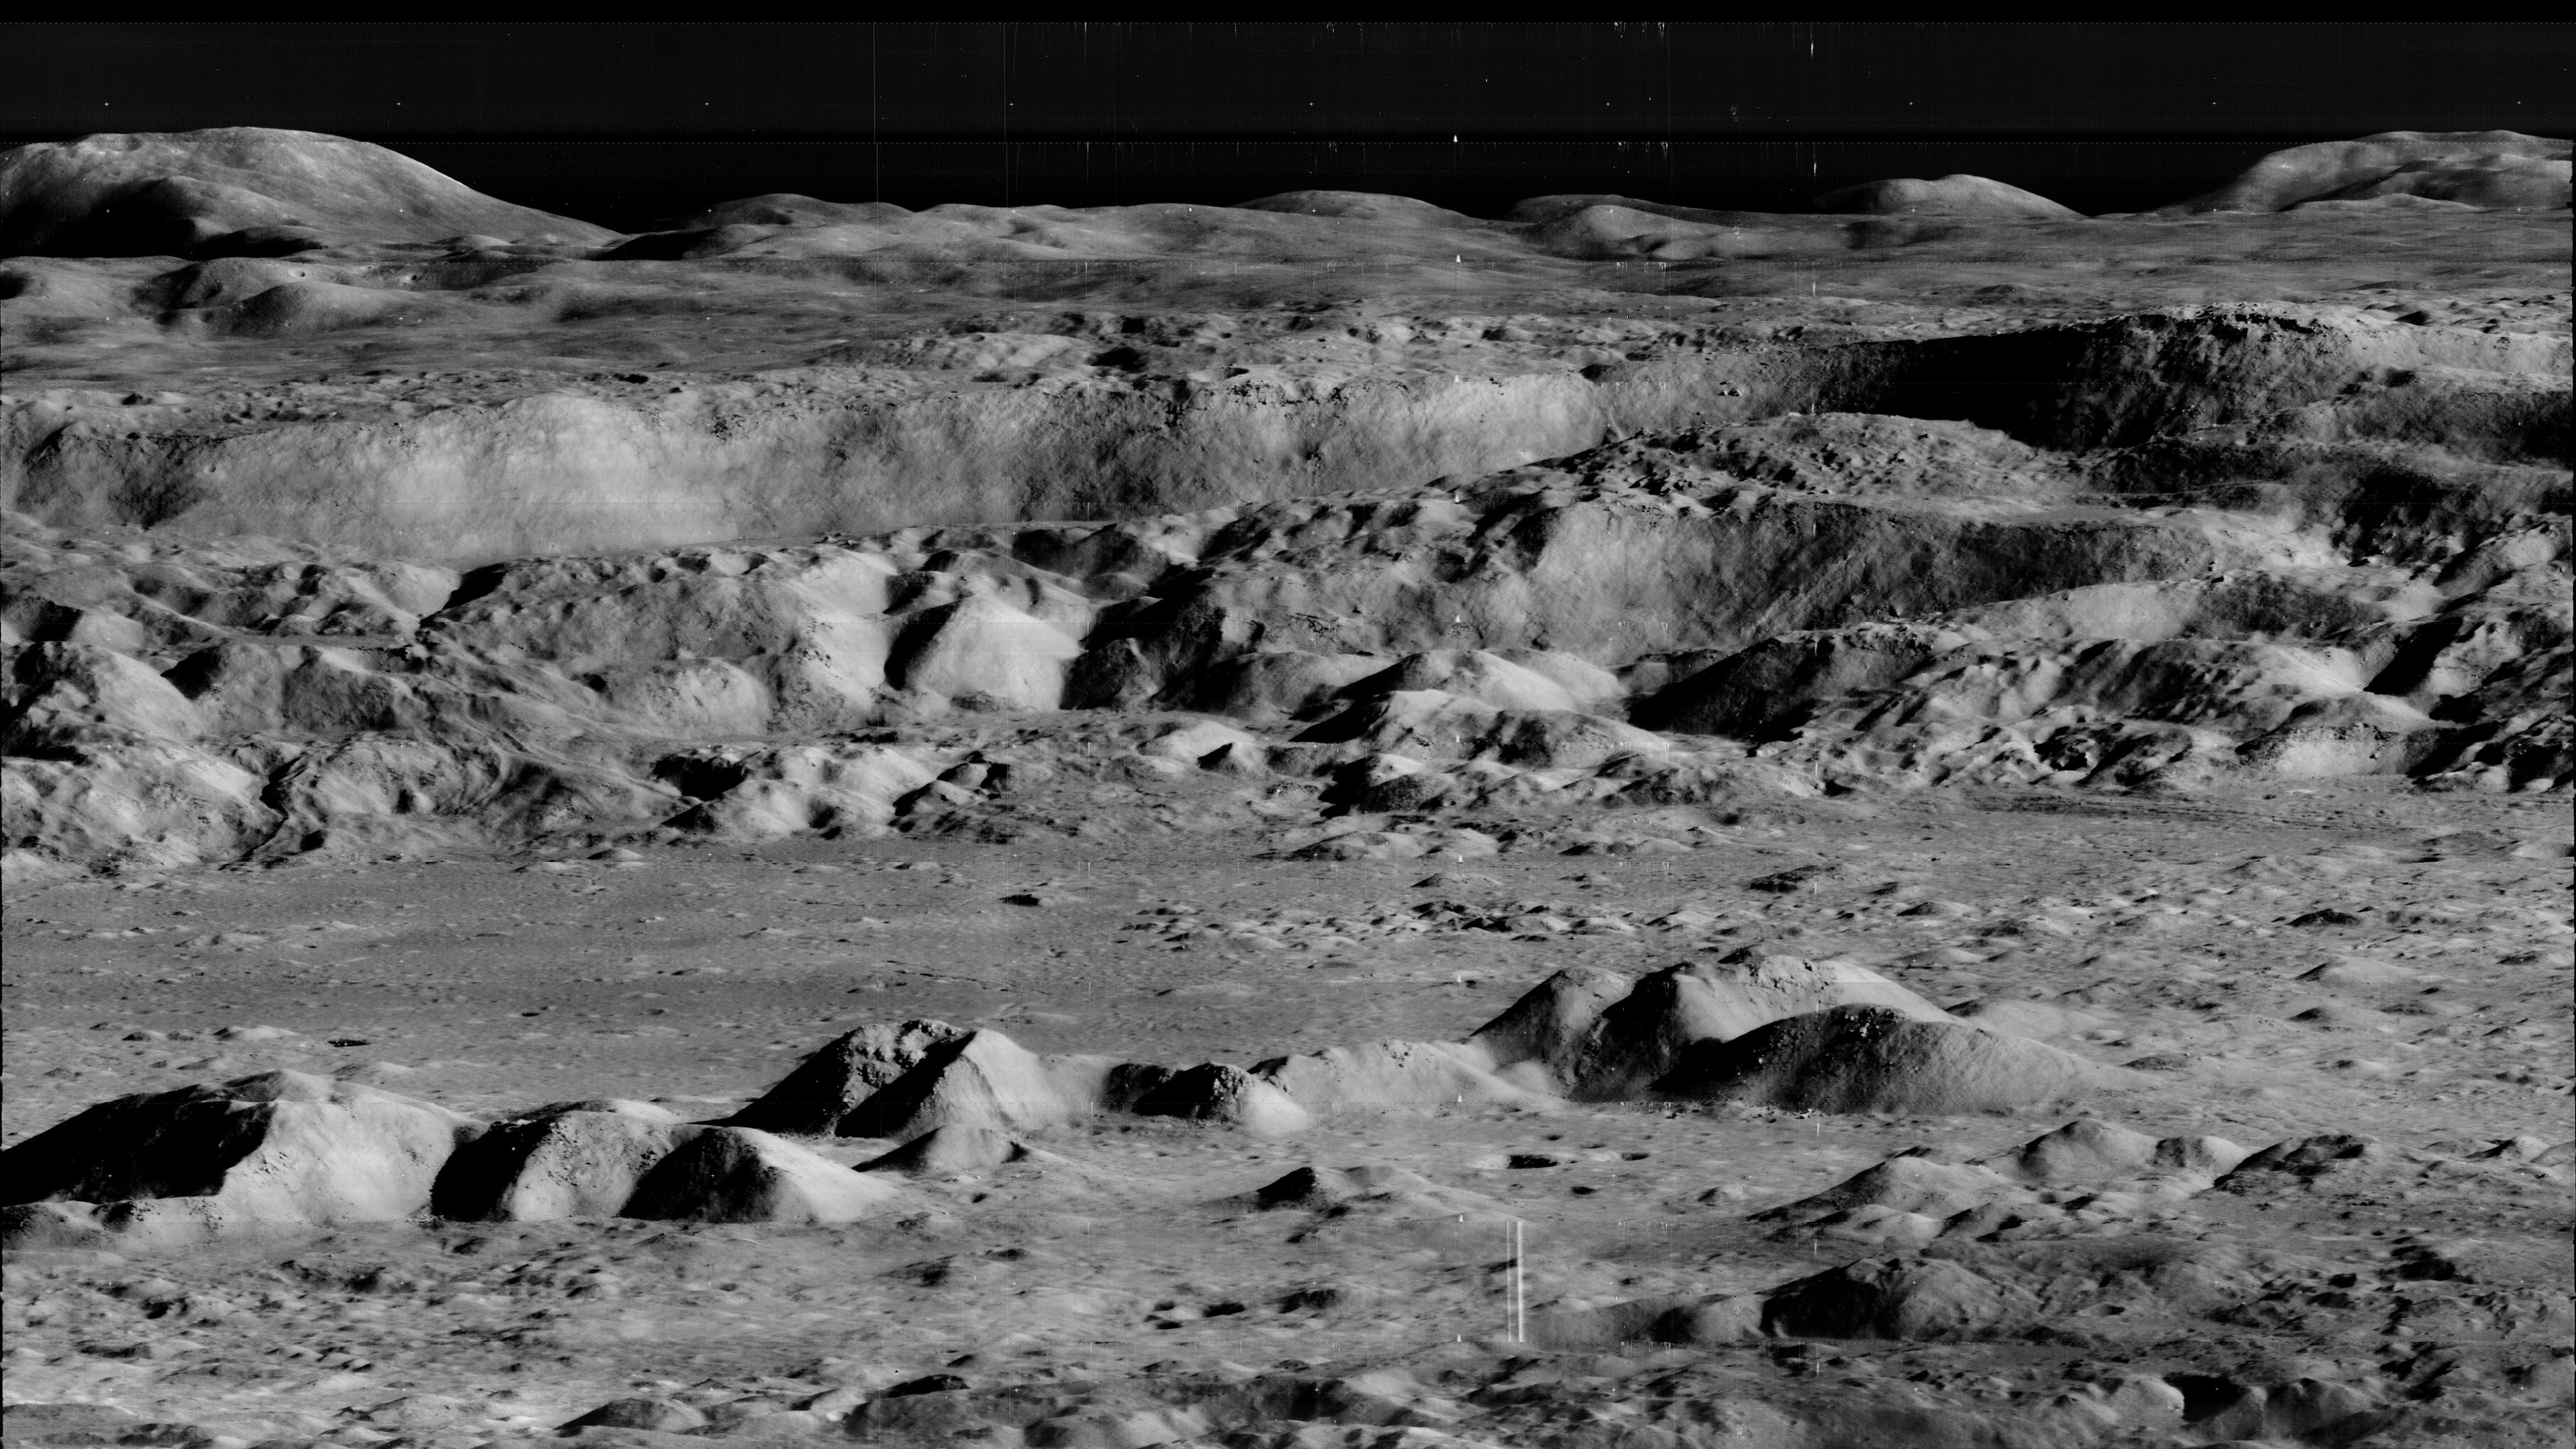 An overhead view of Copernicus crater shows ridges and cliffs extended to a dark horizon.